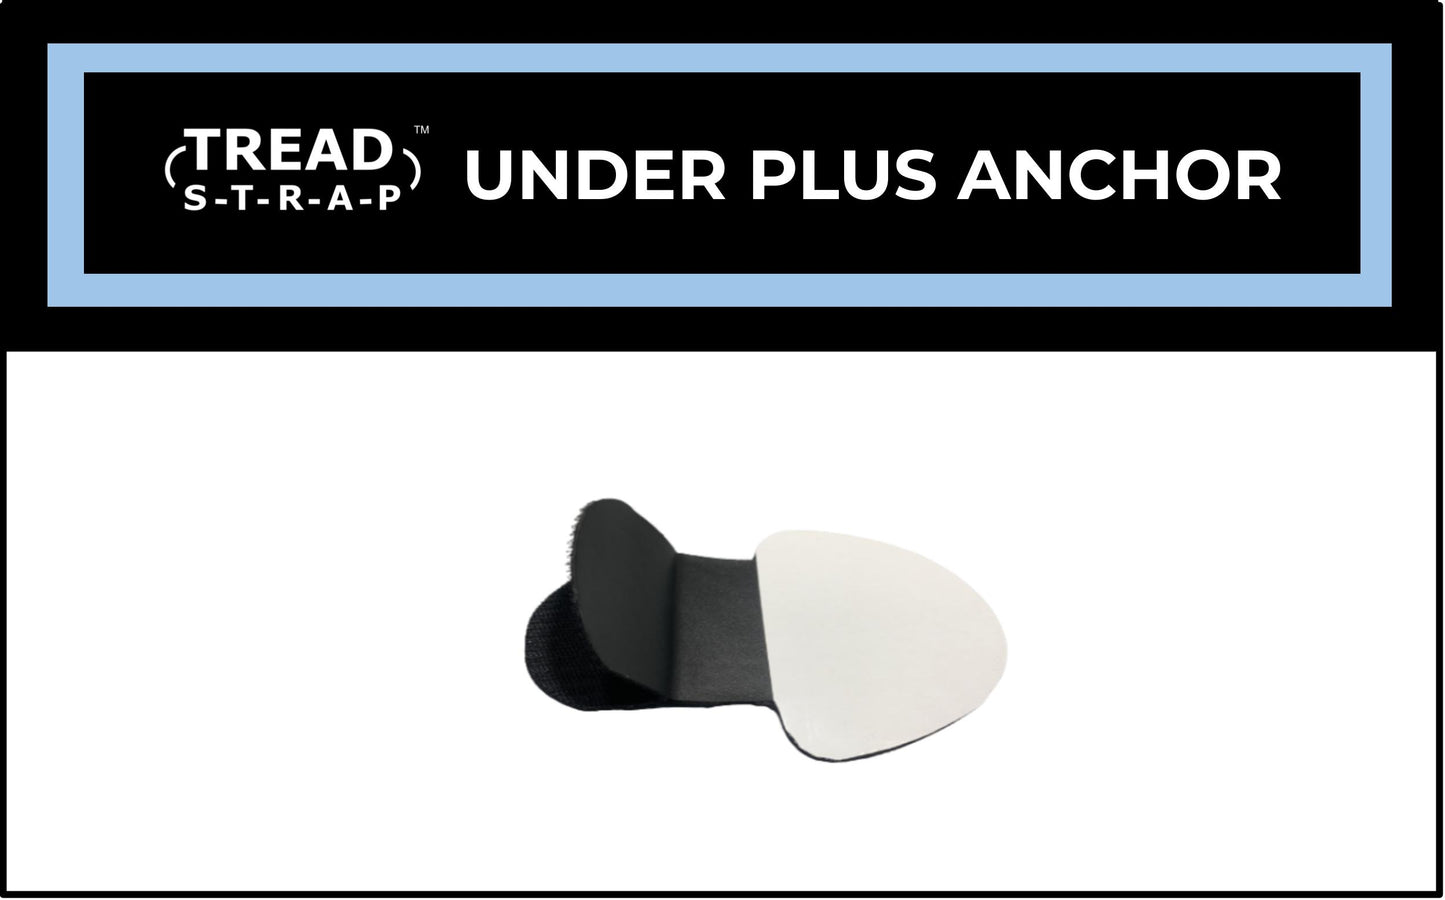 UNDER PLUS ANCHOR 1-Pack - Foot Drop Ankle-Foot Orthosis (AFO)